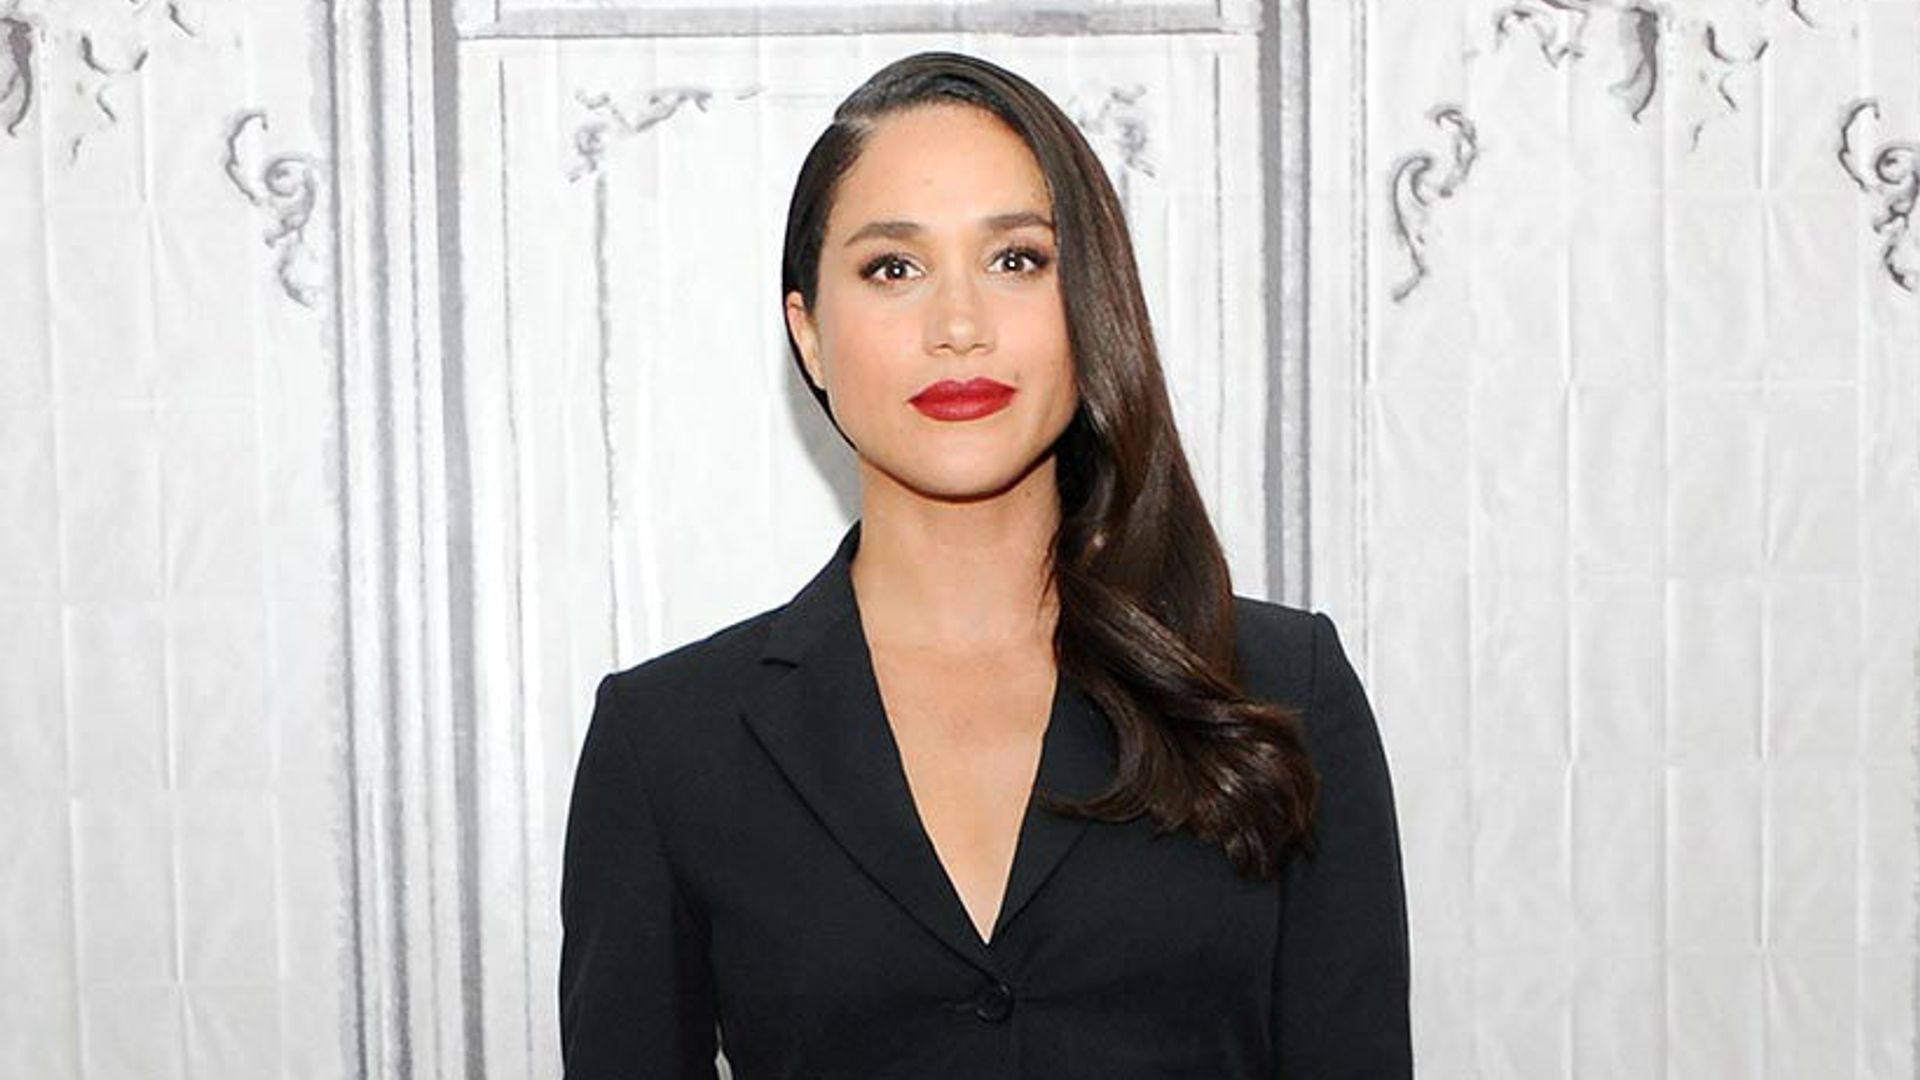 Meghan Markle’s make-up artist reveals her must-have beauty essentials